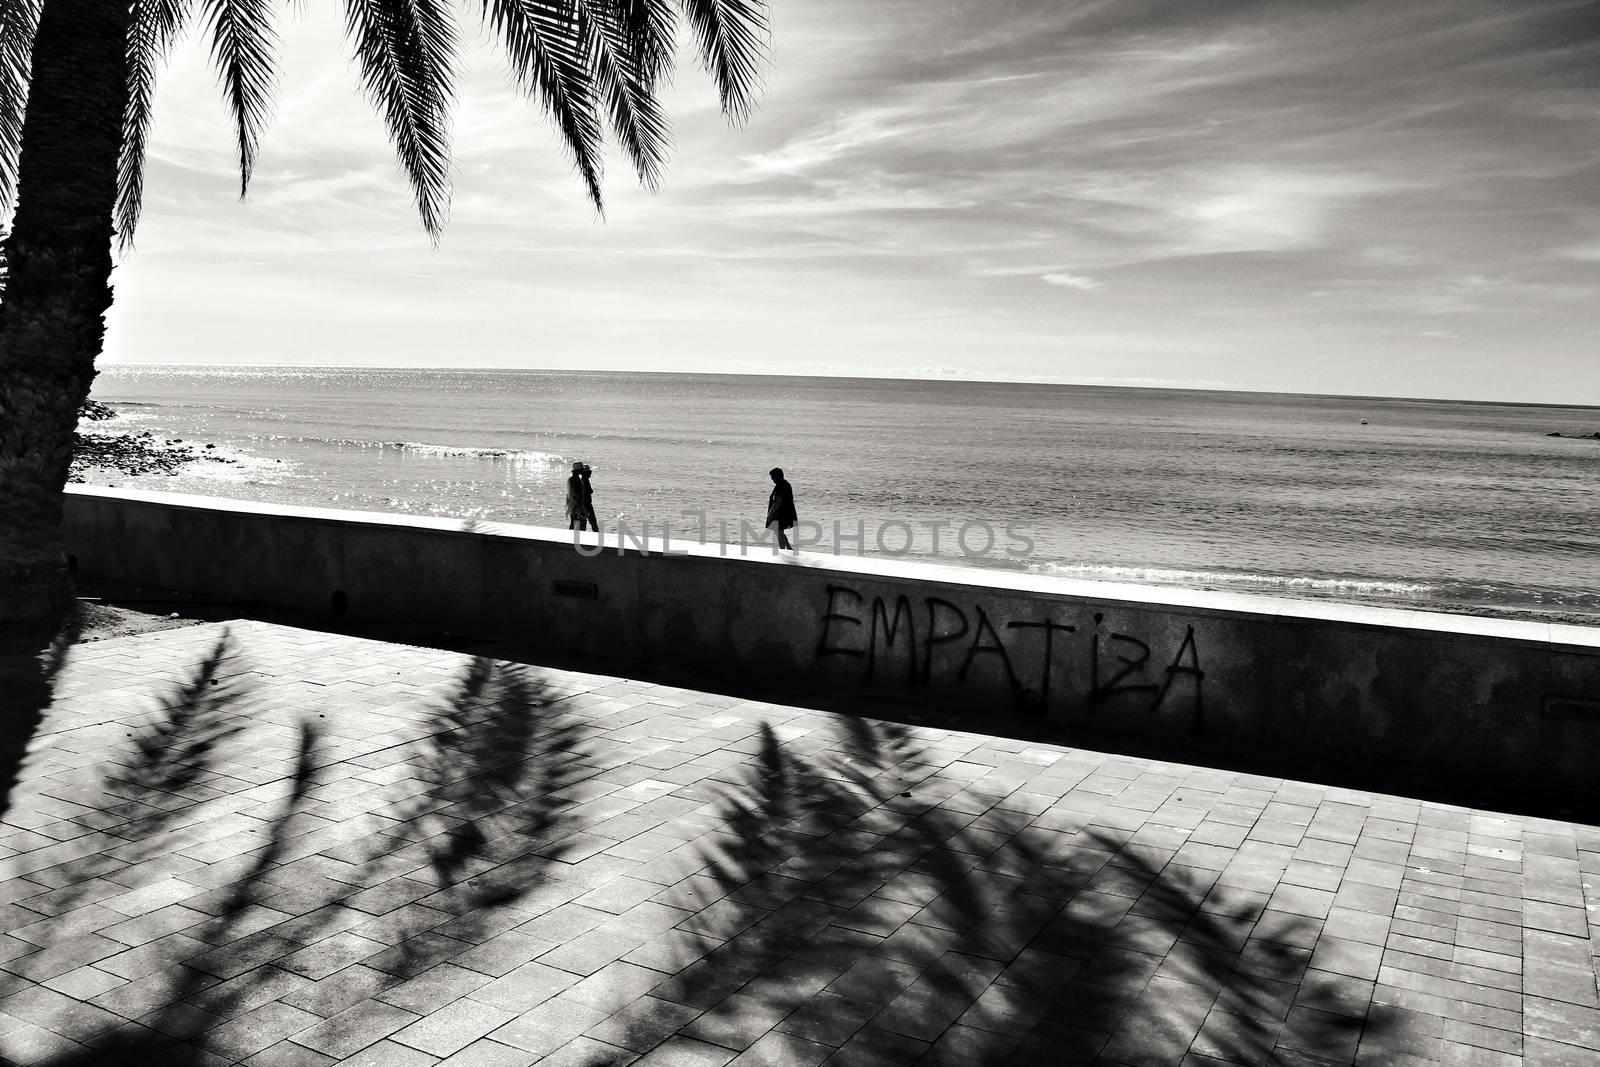 Mazarron, Murcia, Spain- October 3, 2019: Beautiful beach view from the promenade in a sunny and clear day in Mazarron, Murcia, Spain. Empathic word written on the wall.